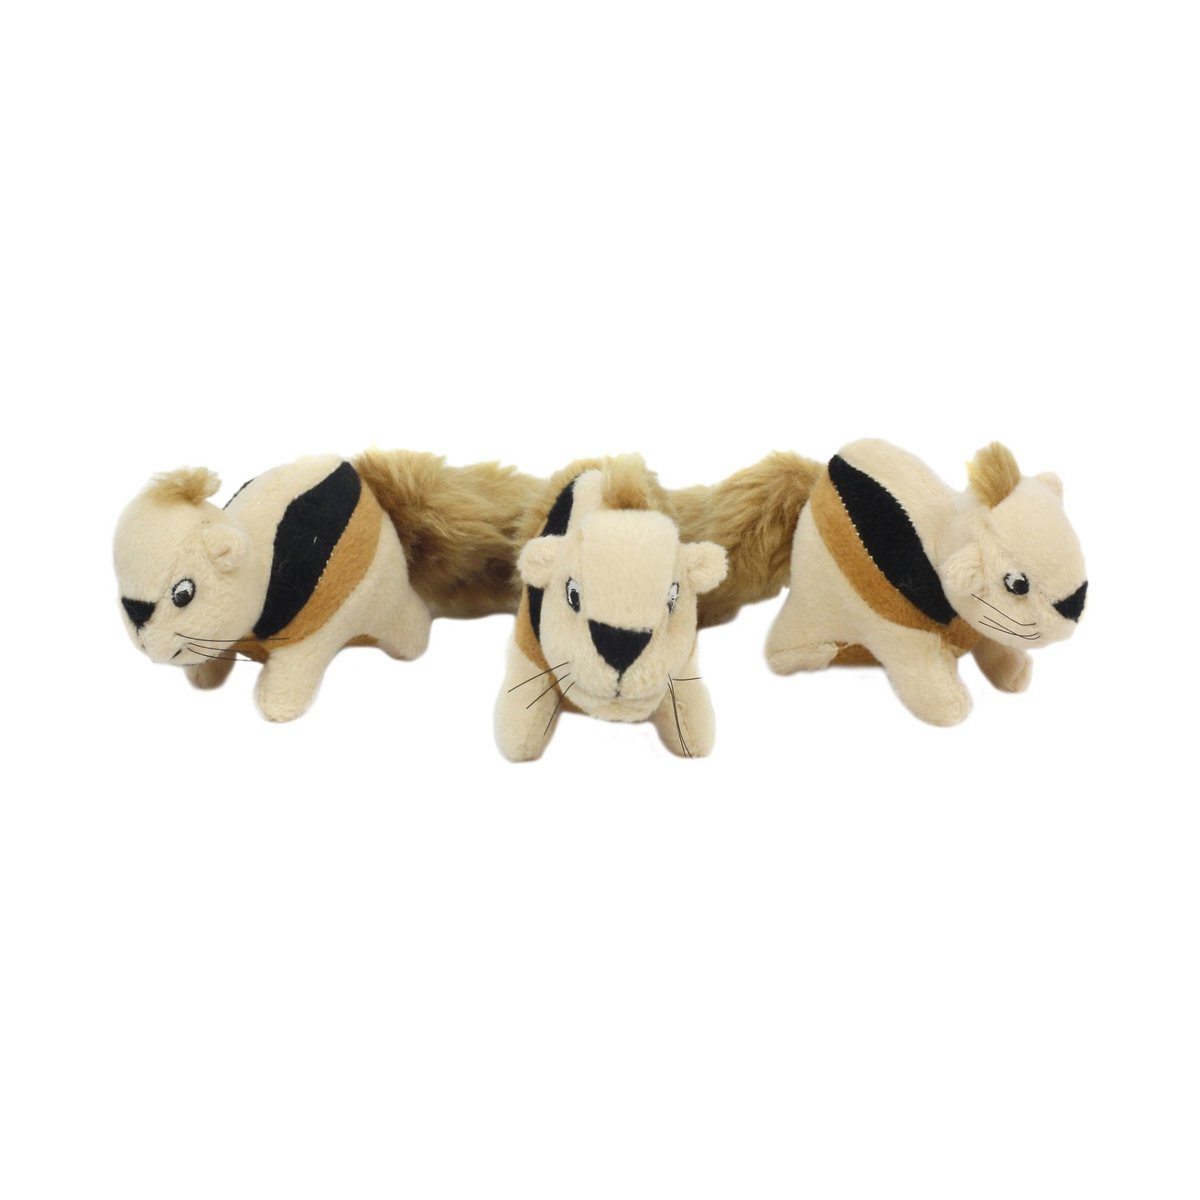 http://www.pawlicious.com/cdn/shop/products/hide-a-squirrel-replacement-squirrels-3-pack-toys-outward-hound-840289.jpg?v=1570639286